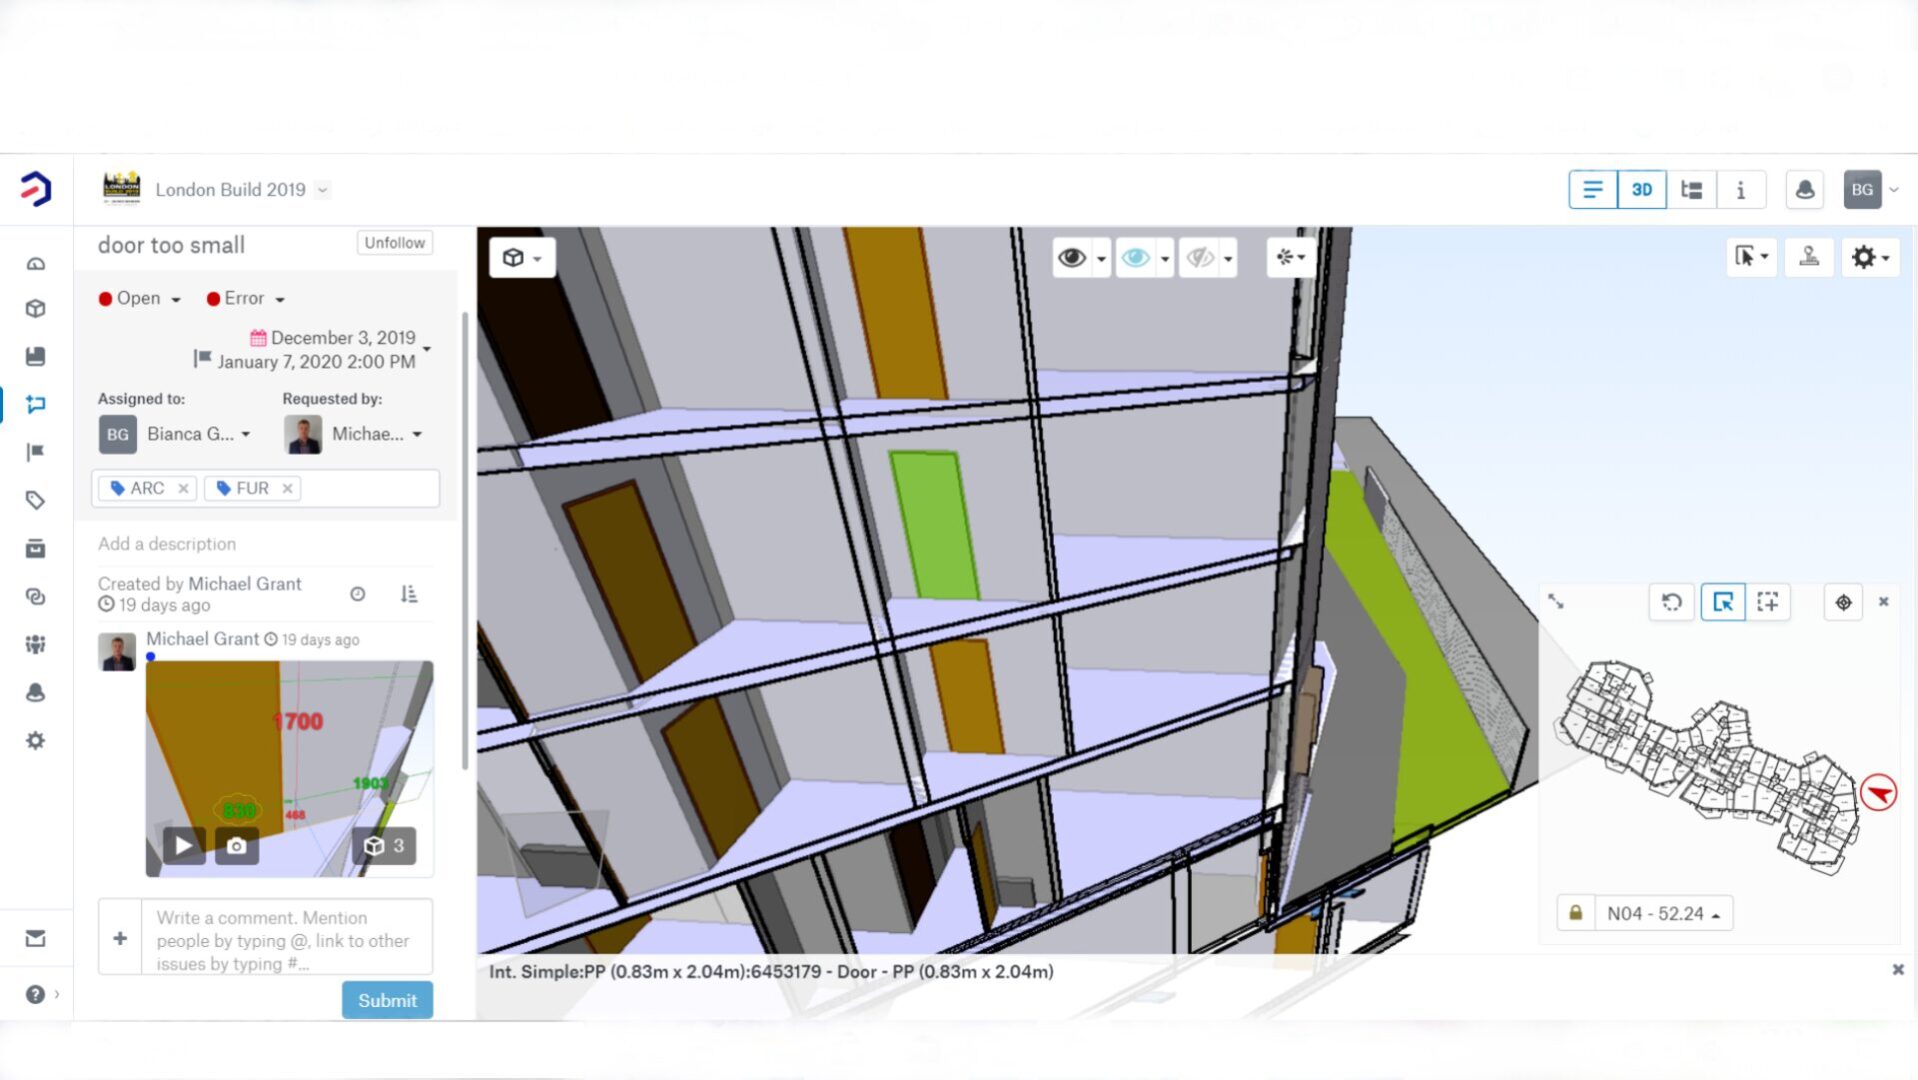 Catenda Hub screenshot of an issue with a too small door in a construction